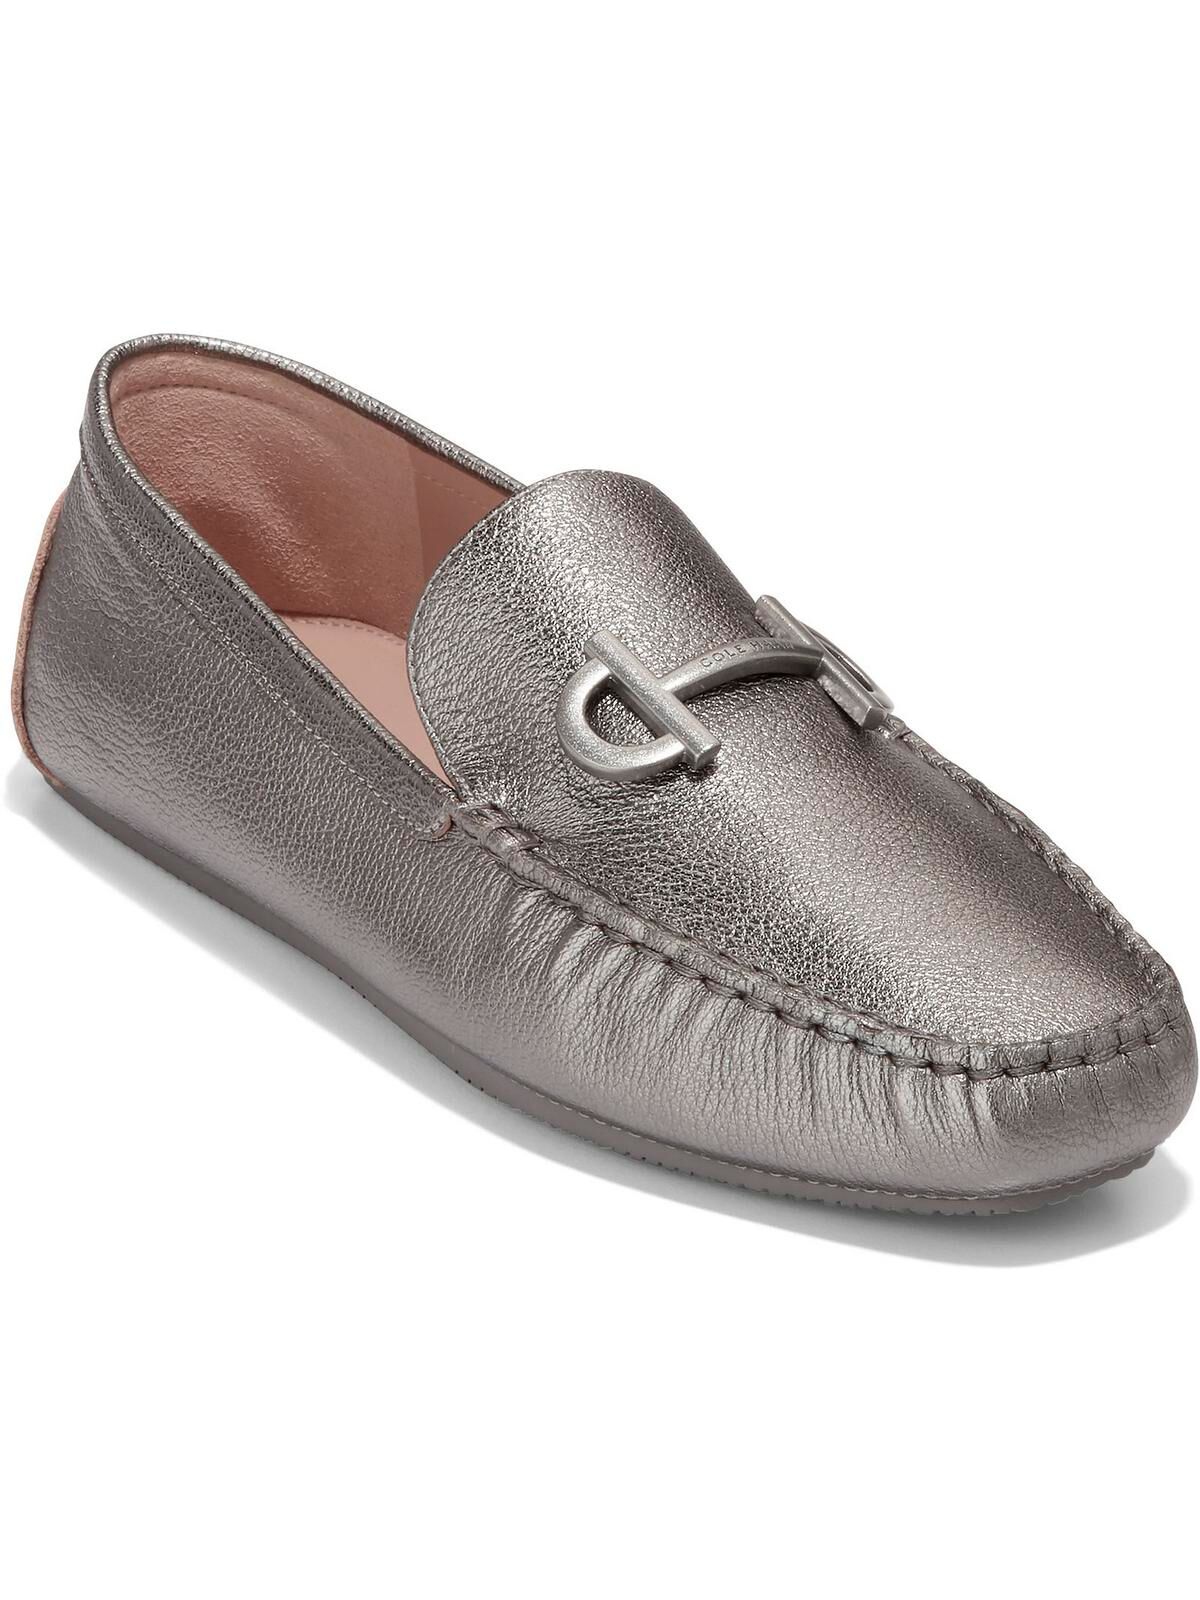 Cole Haan Tully Driver Womens Leather Metallic Loafers US 6 female